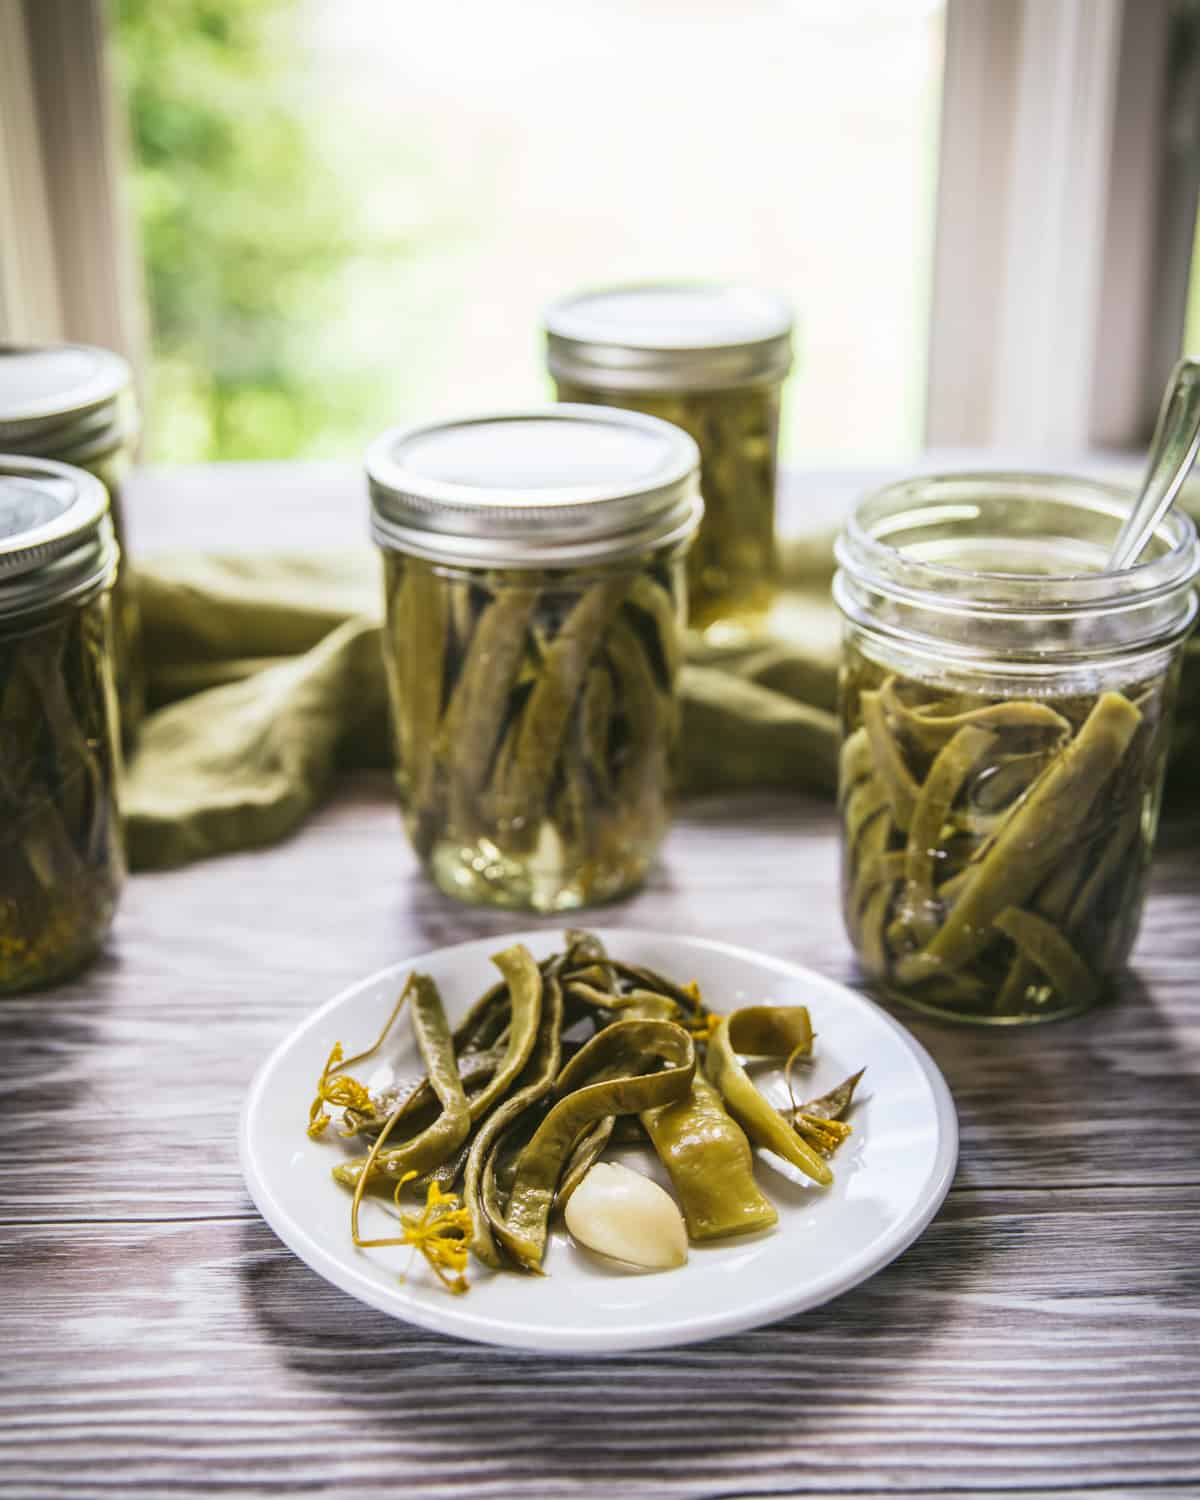 Dilly beans on a white plate on a wood surface with jars in the background, side view.